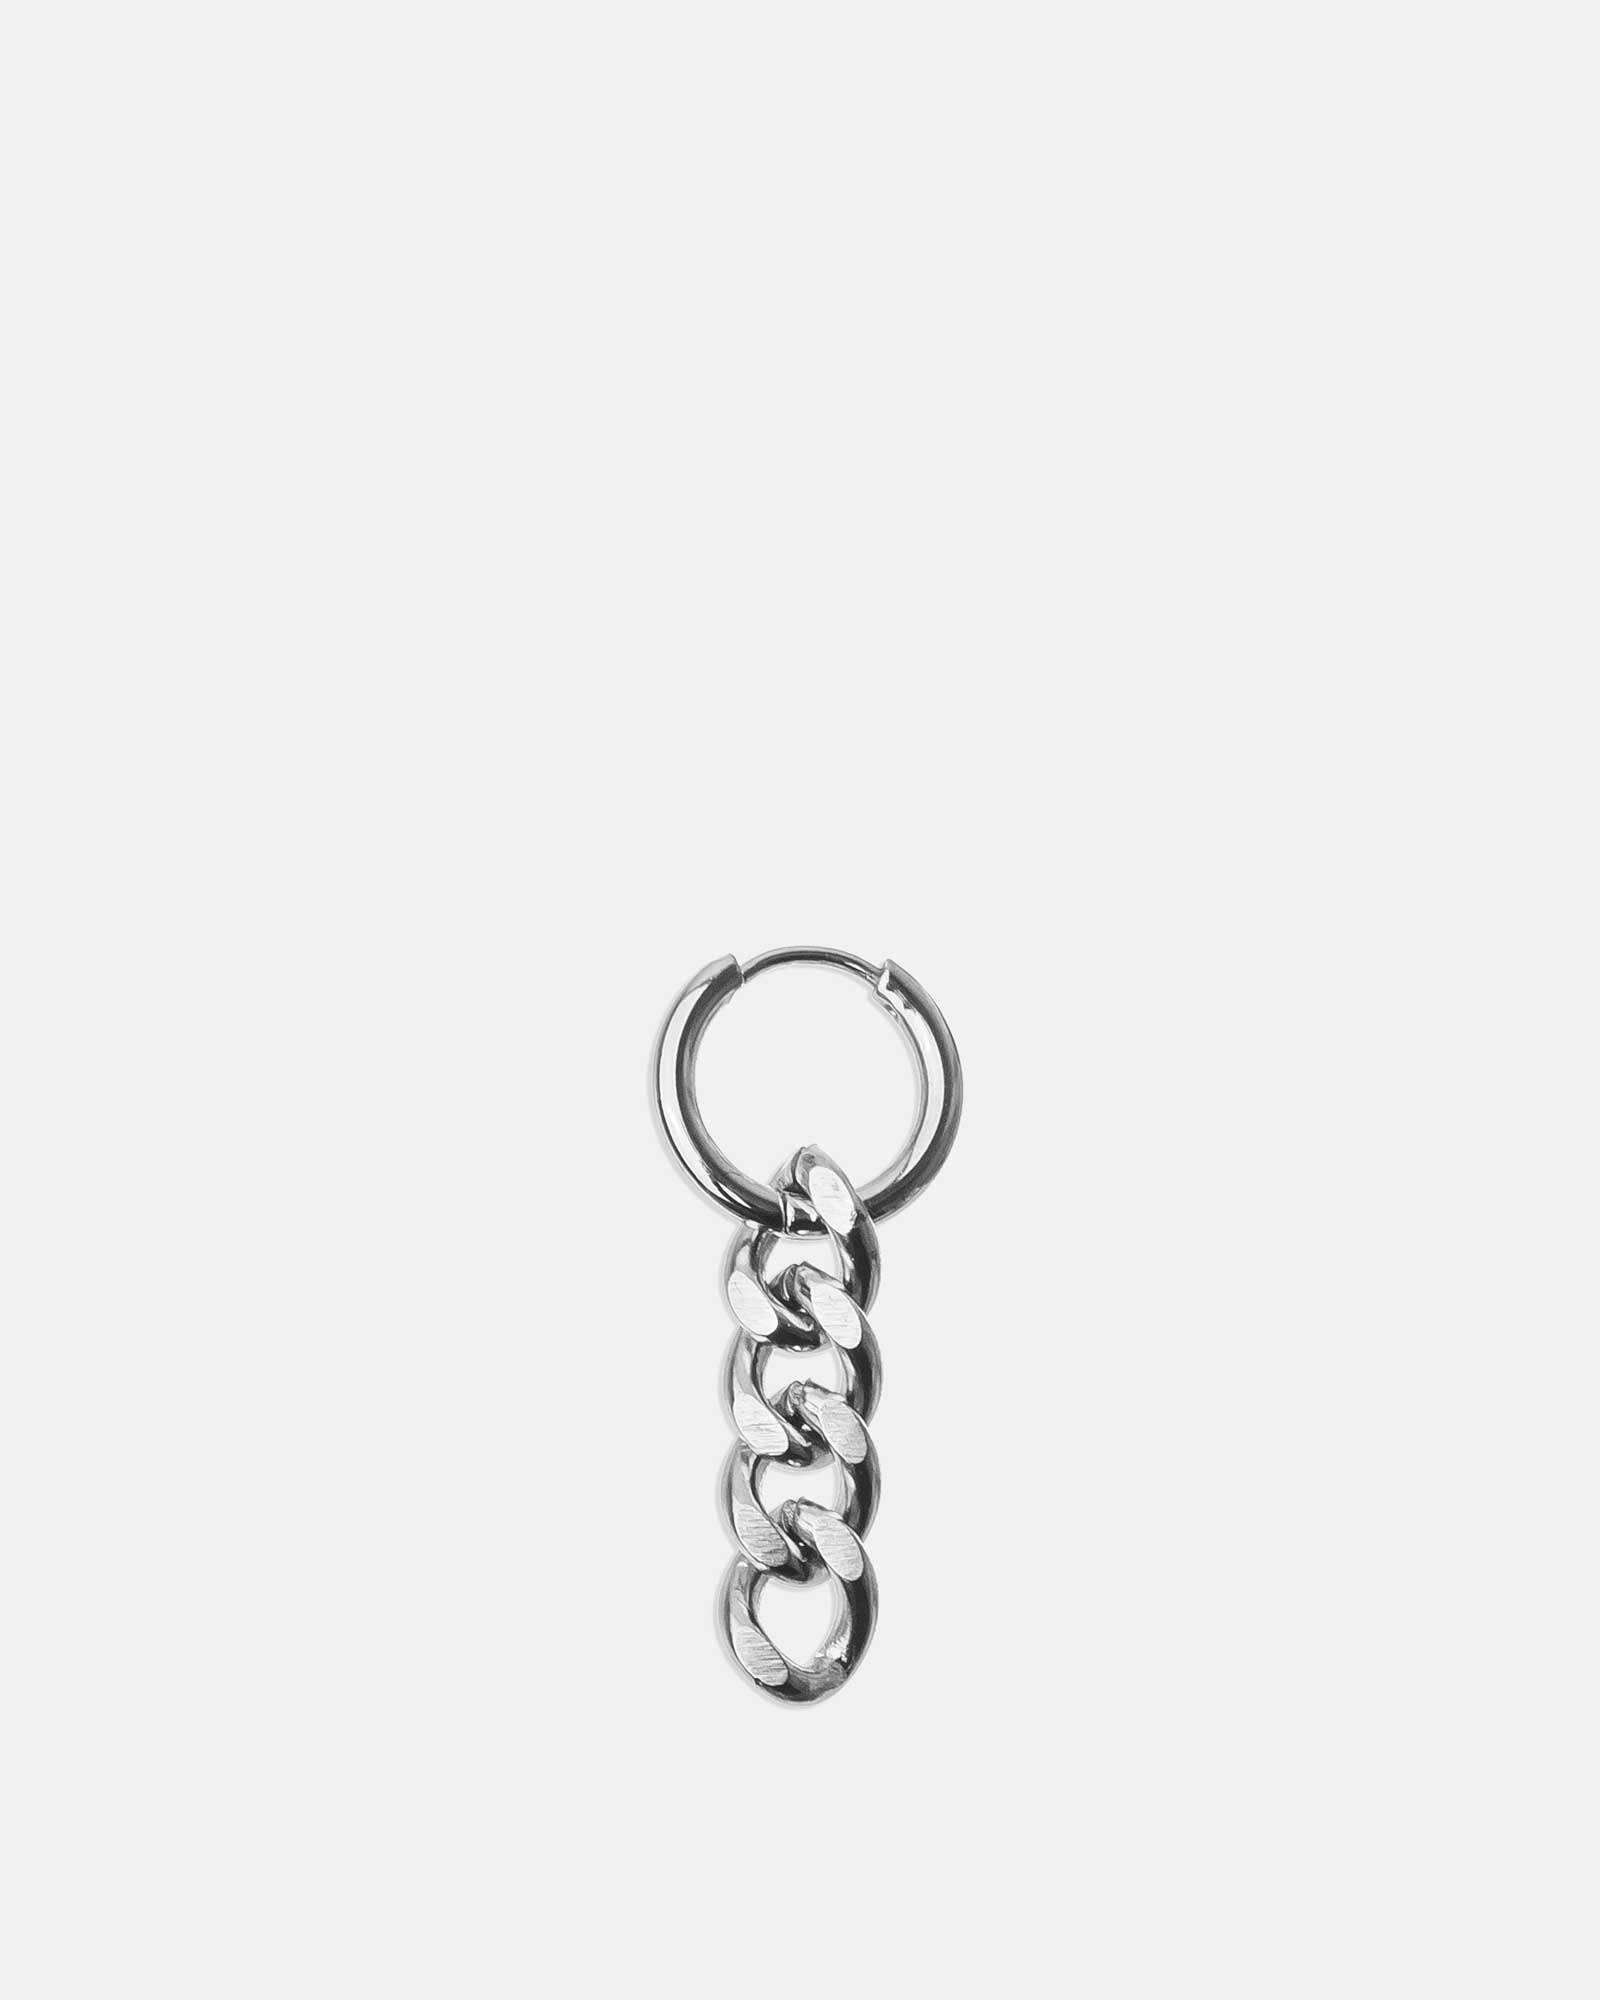 Chain Earring - Stainless Steel - Online Jewelry - Dicci